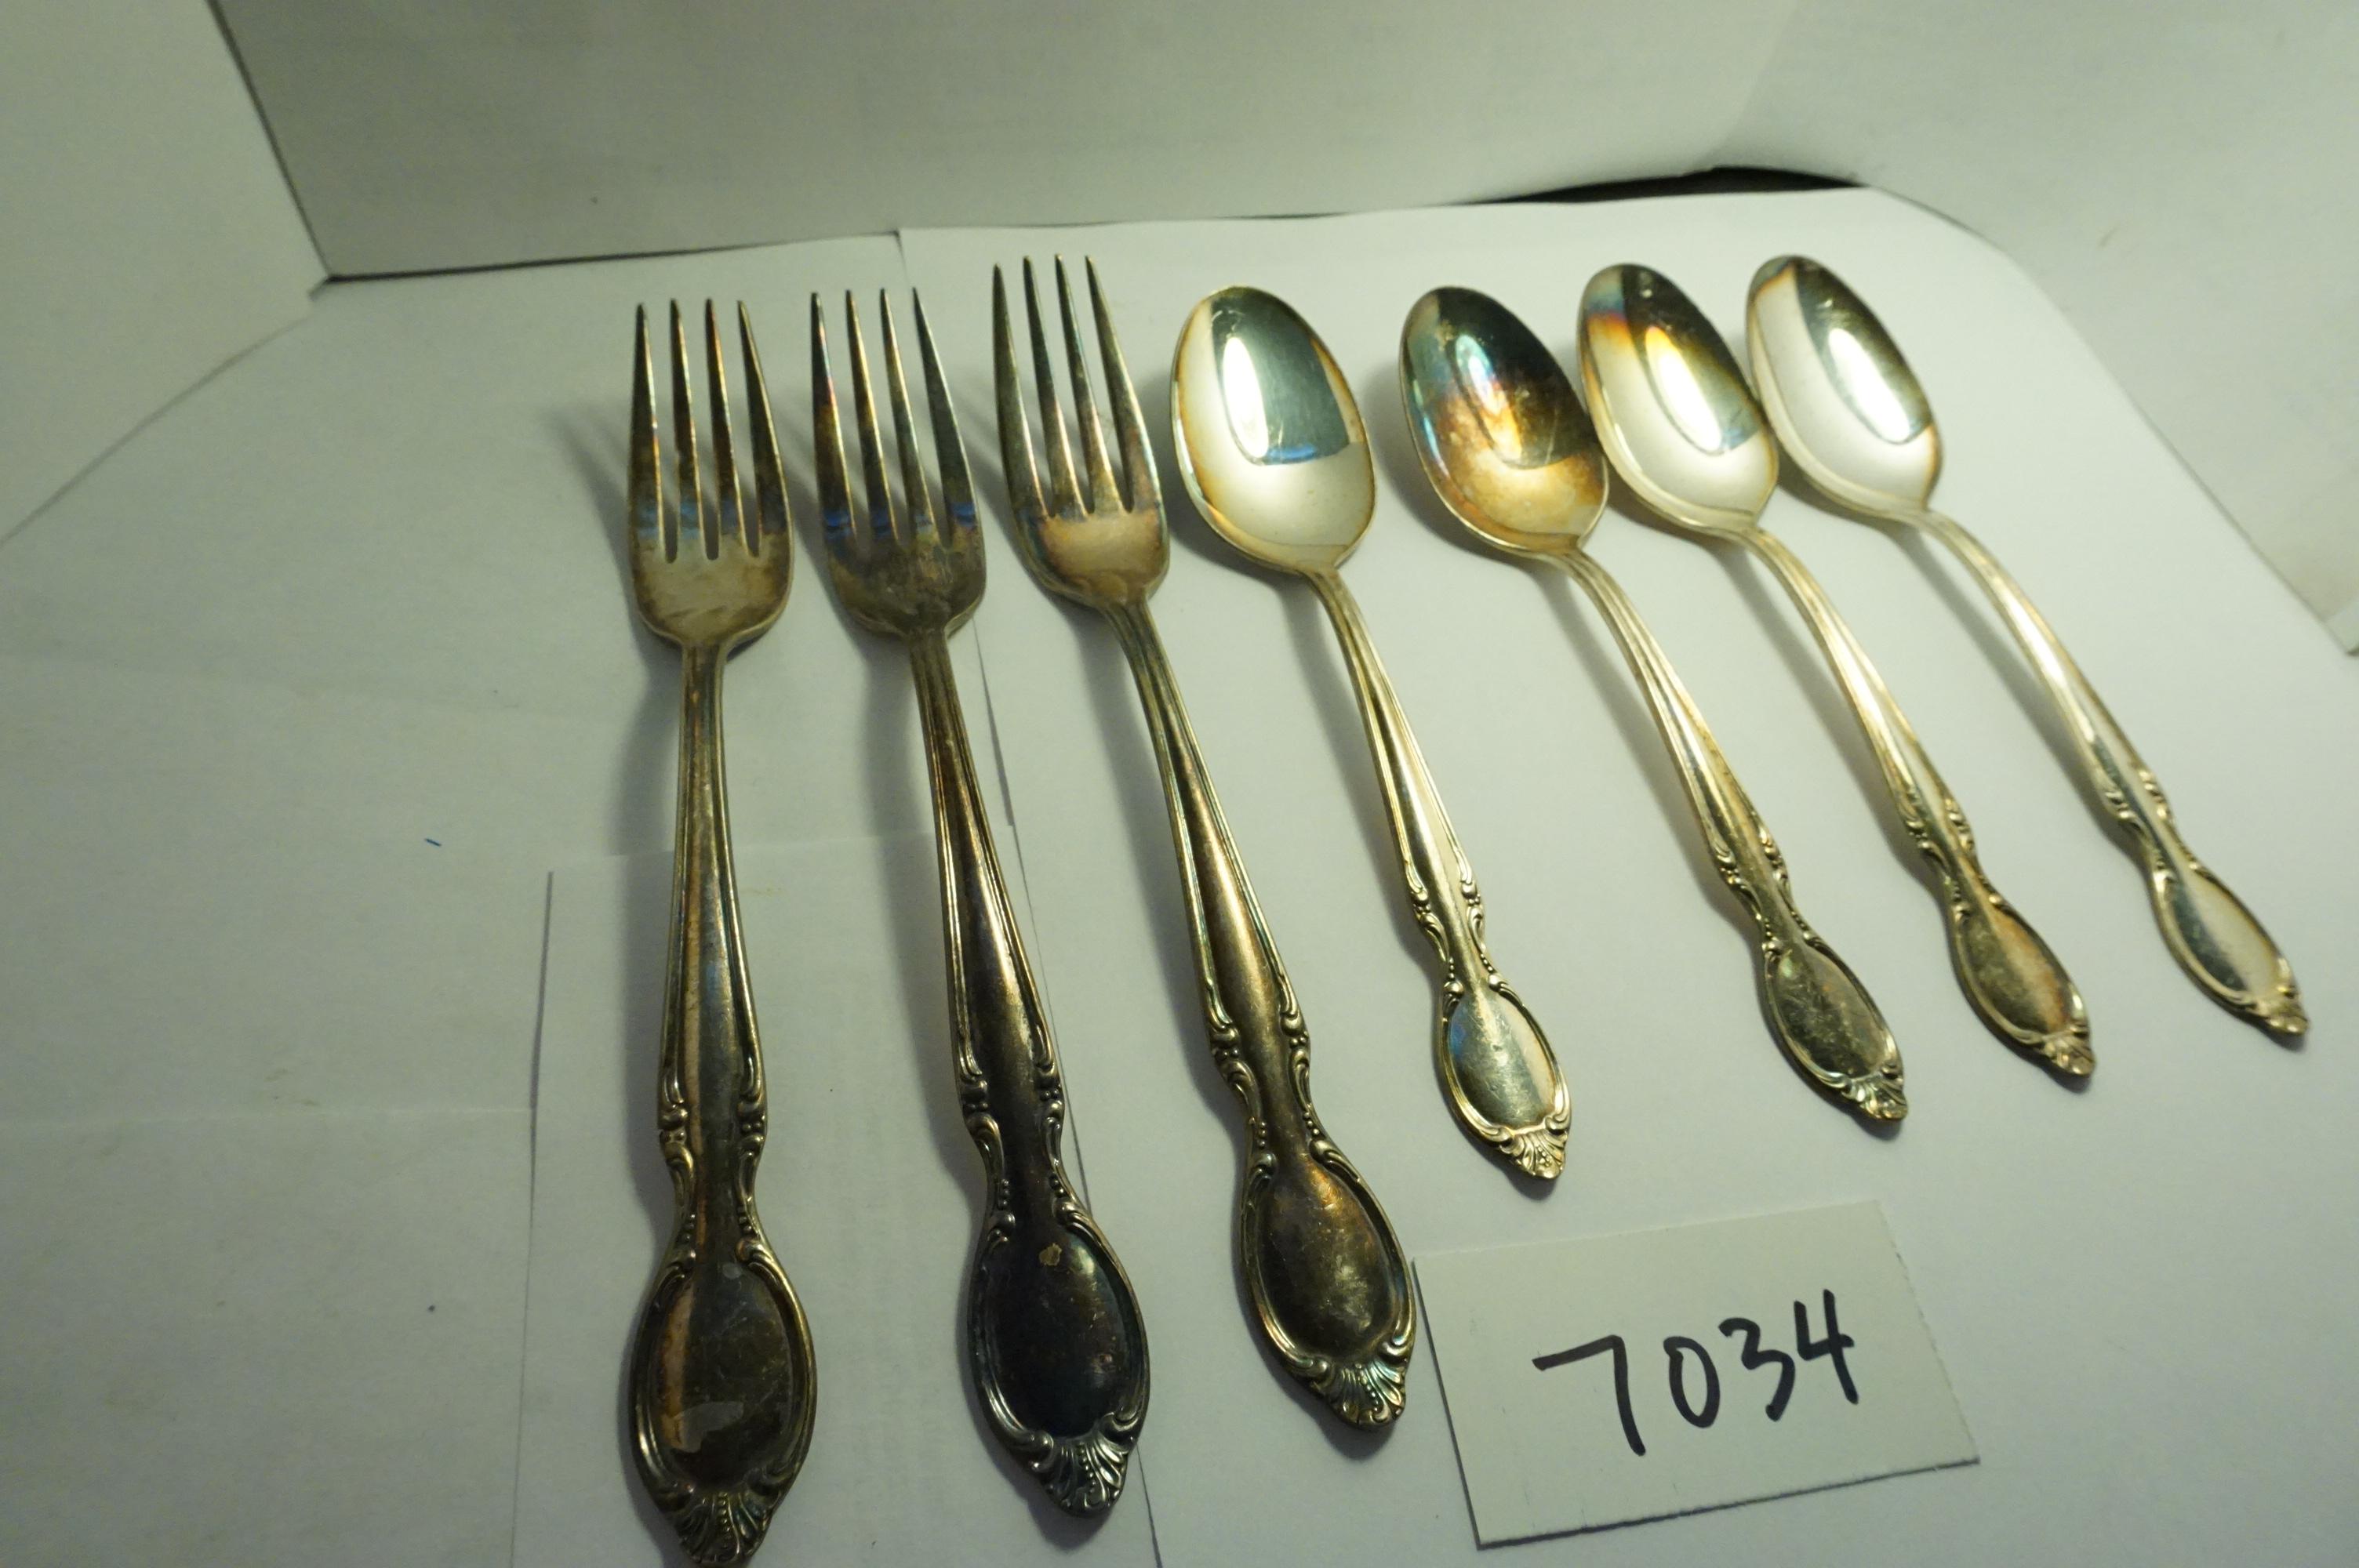 Seven Pieces of Roger Flatware, All One Money, Estae Find, Metal Content Unknown. marked IS